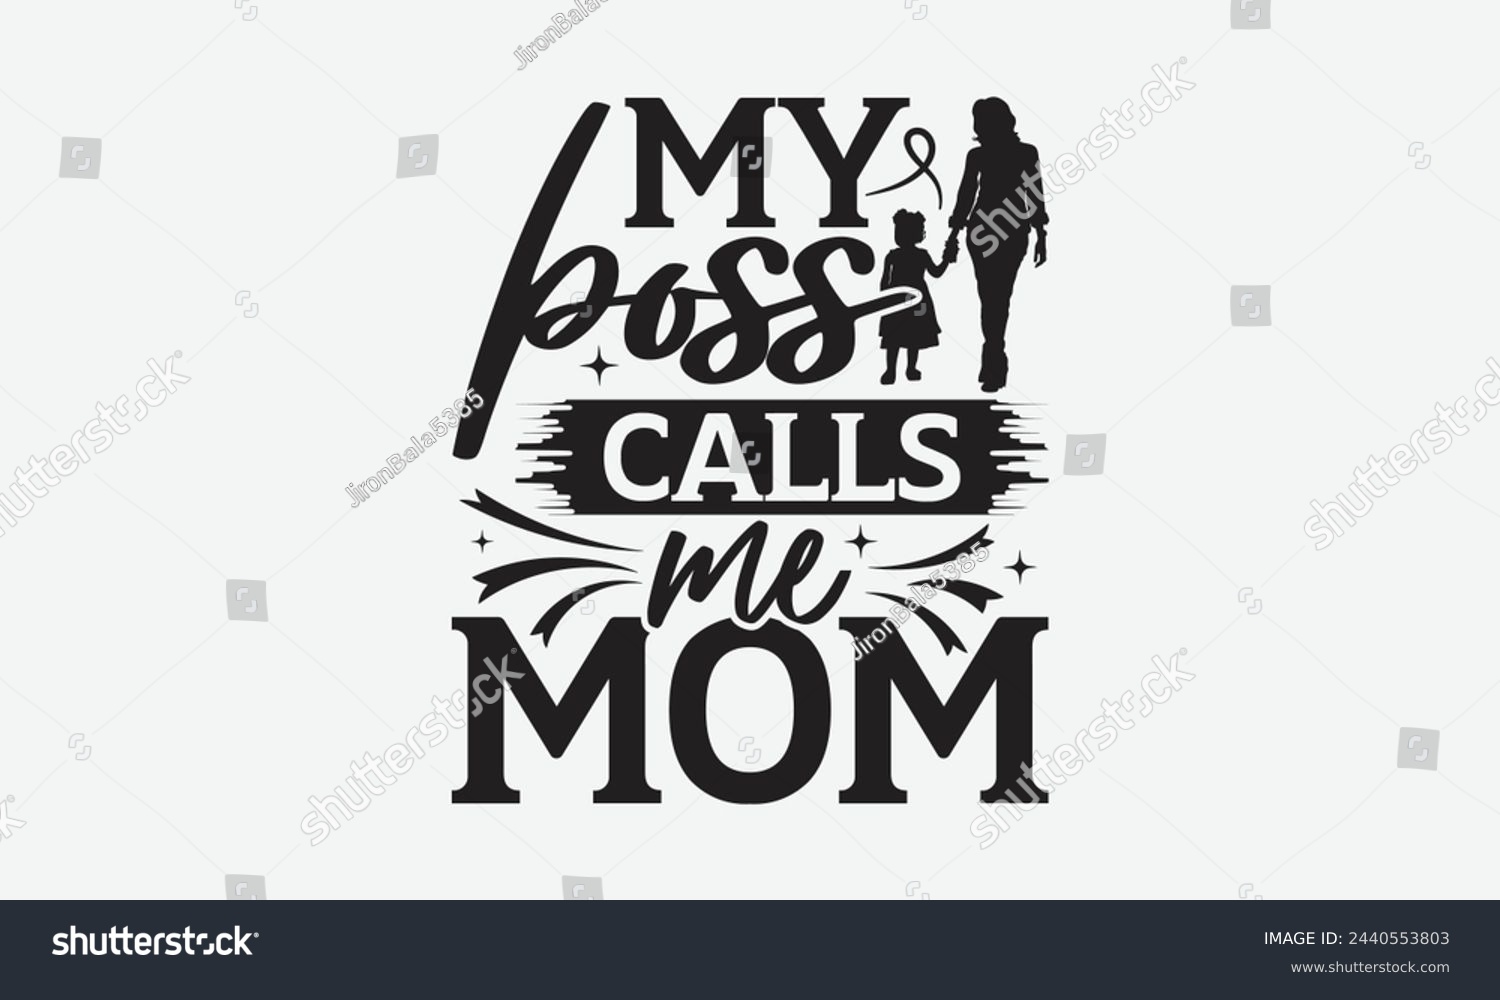 SVG of My boss calls me mom - Mom t-shirt design, isolated on white background, this illustration can be used as a print on t-shirts and bags, cover book, template, stationary or as a poster. svg